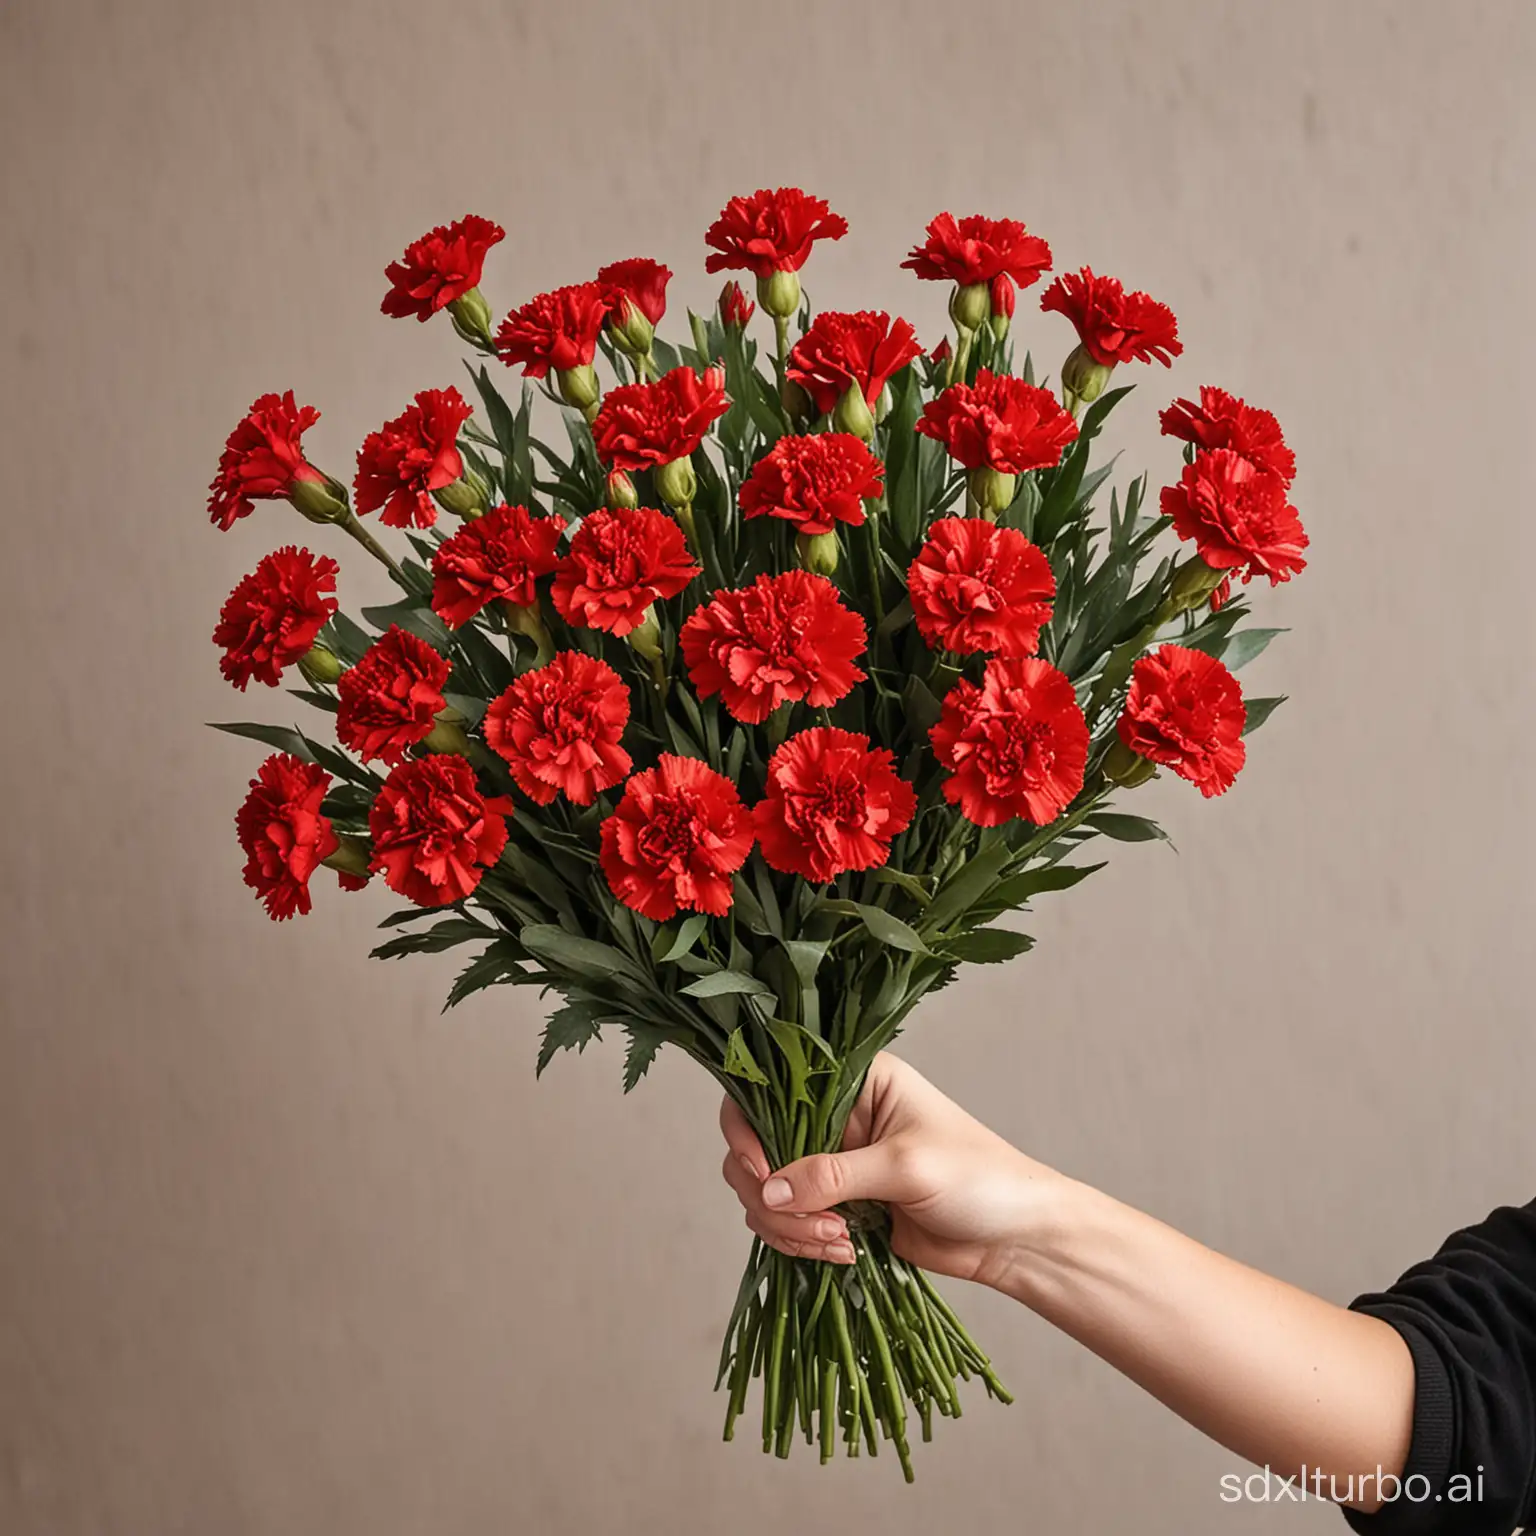 bouquet red carnation (201 pieces) in hands